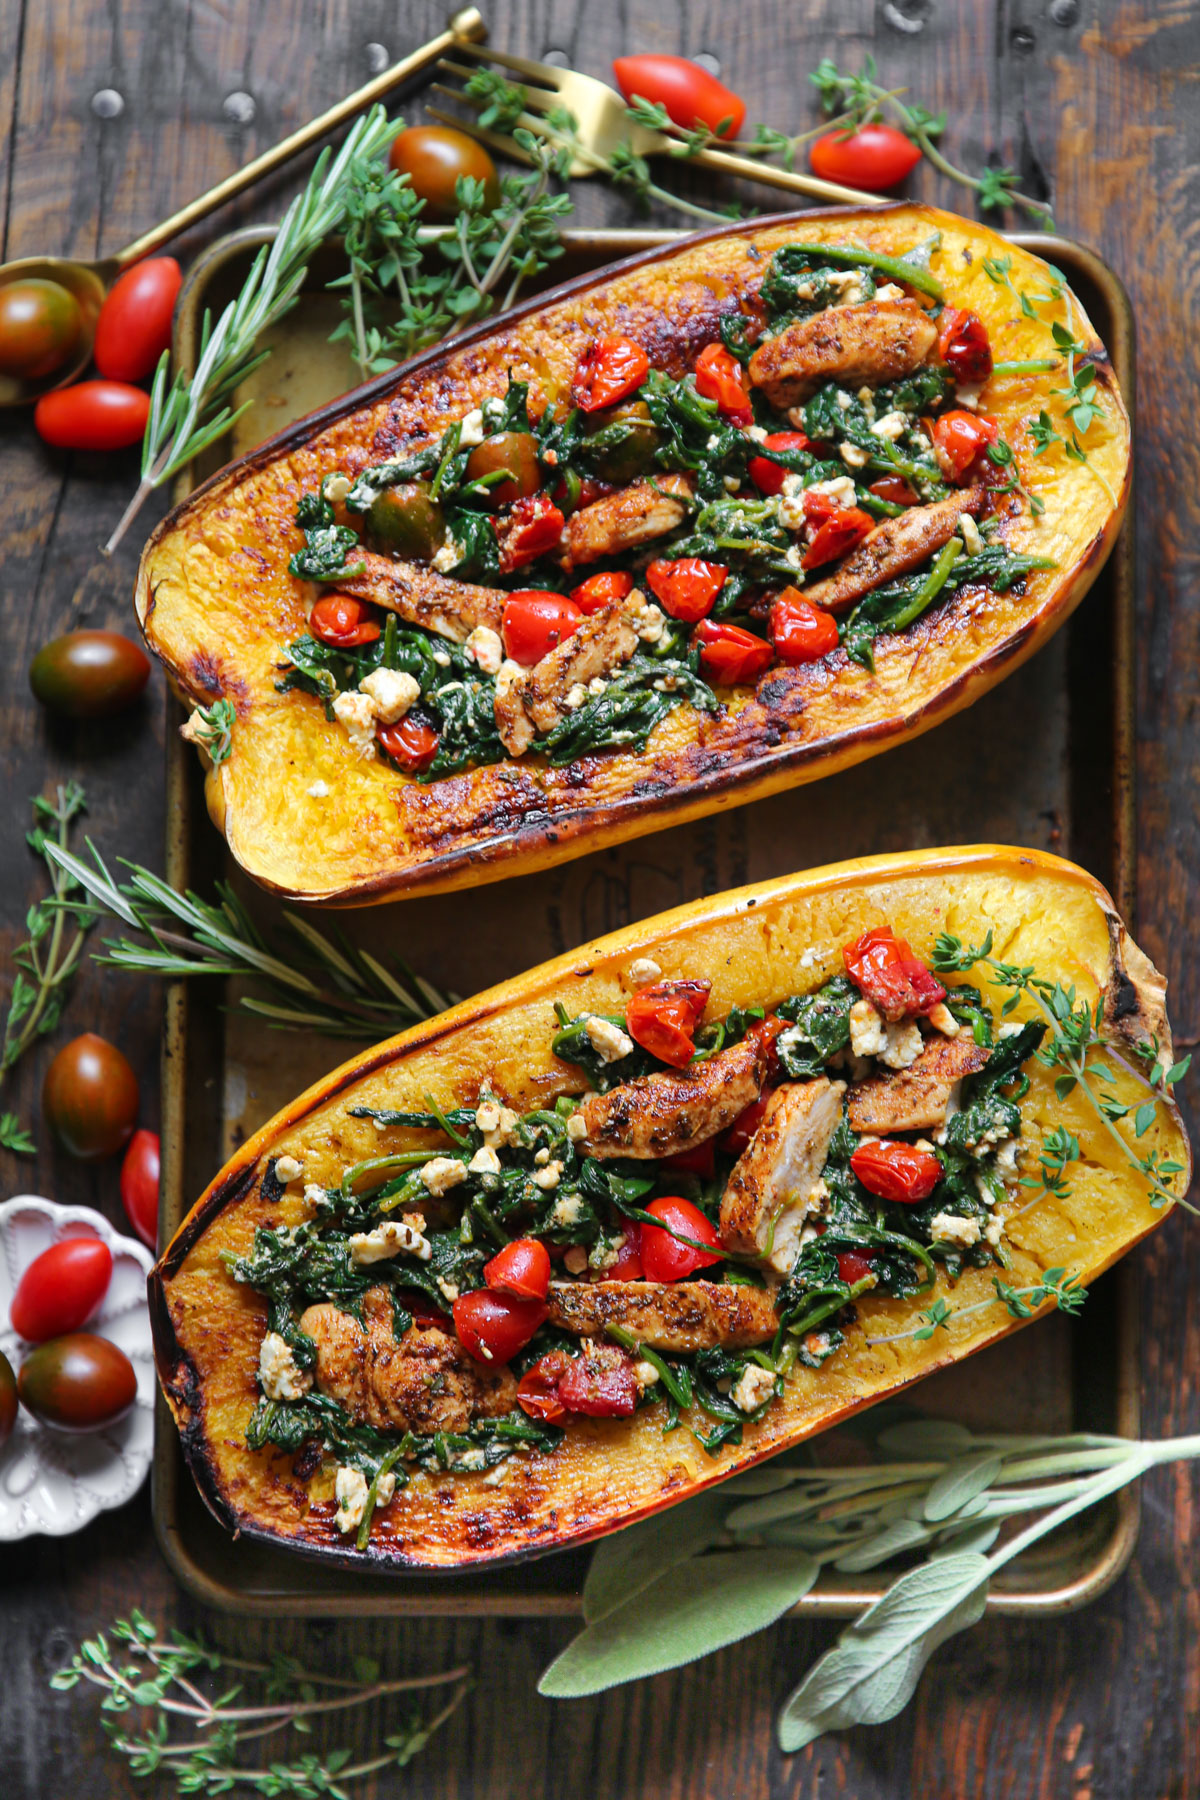 Spaghetti Squash Halves (two) stuffed with Chicken, Cherry Tomatoes, Spinach, and Feta Cheese - on a baking sheet.